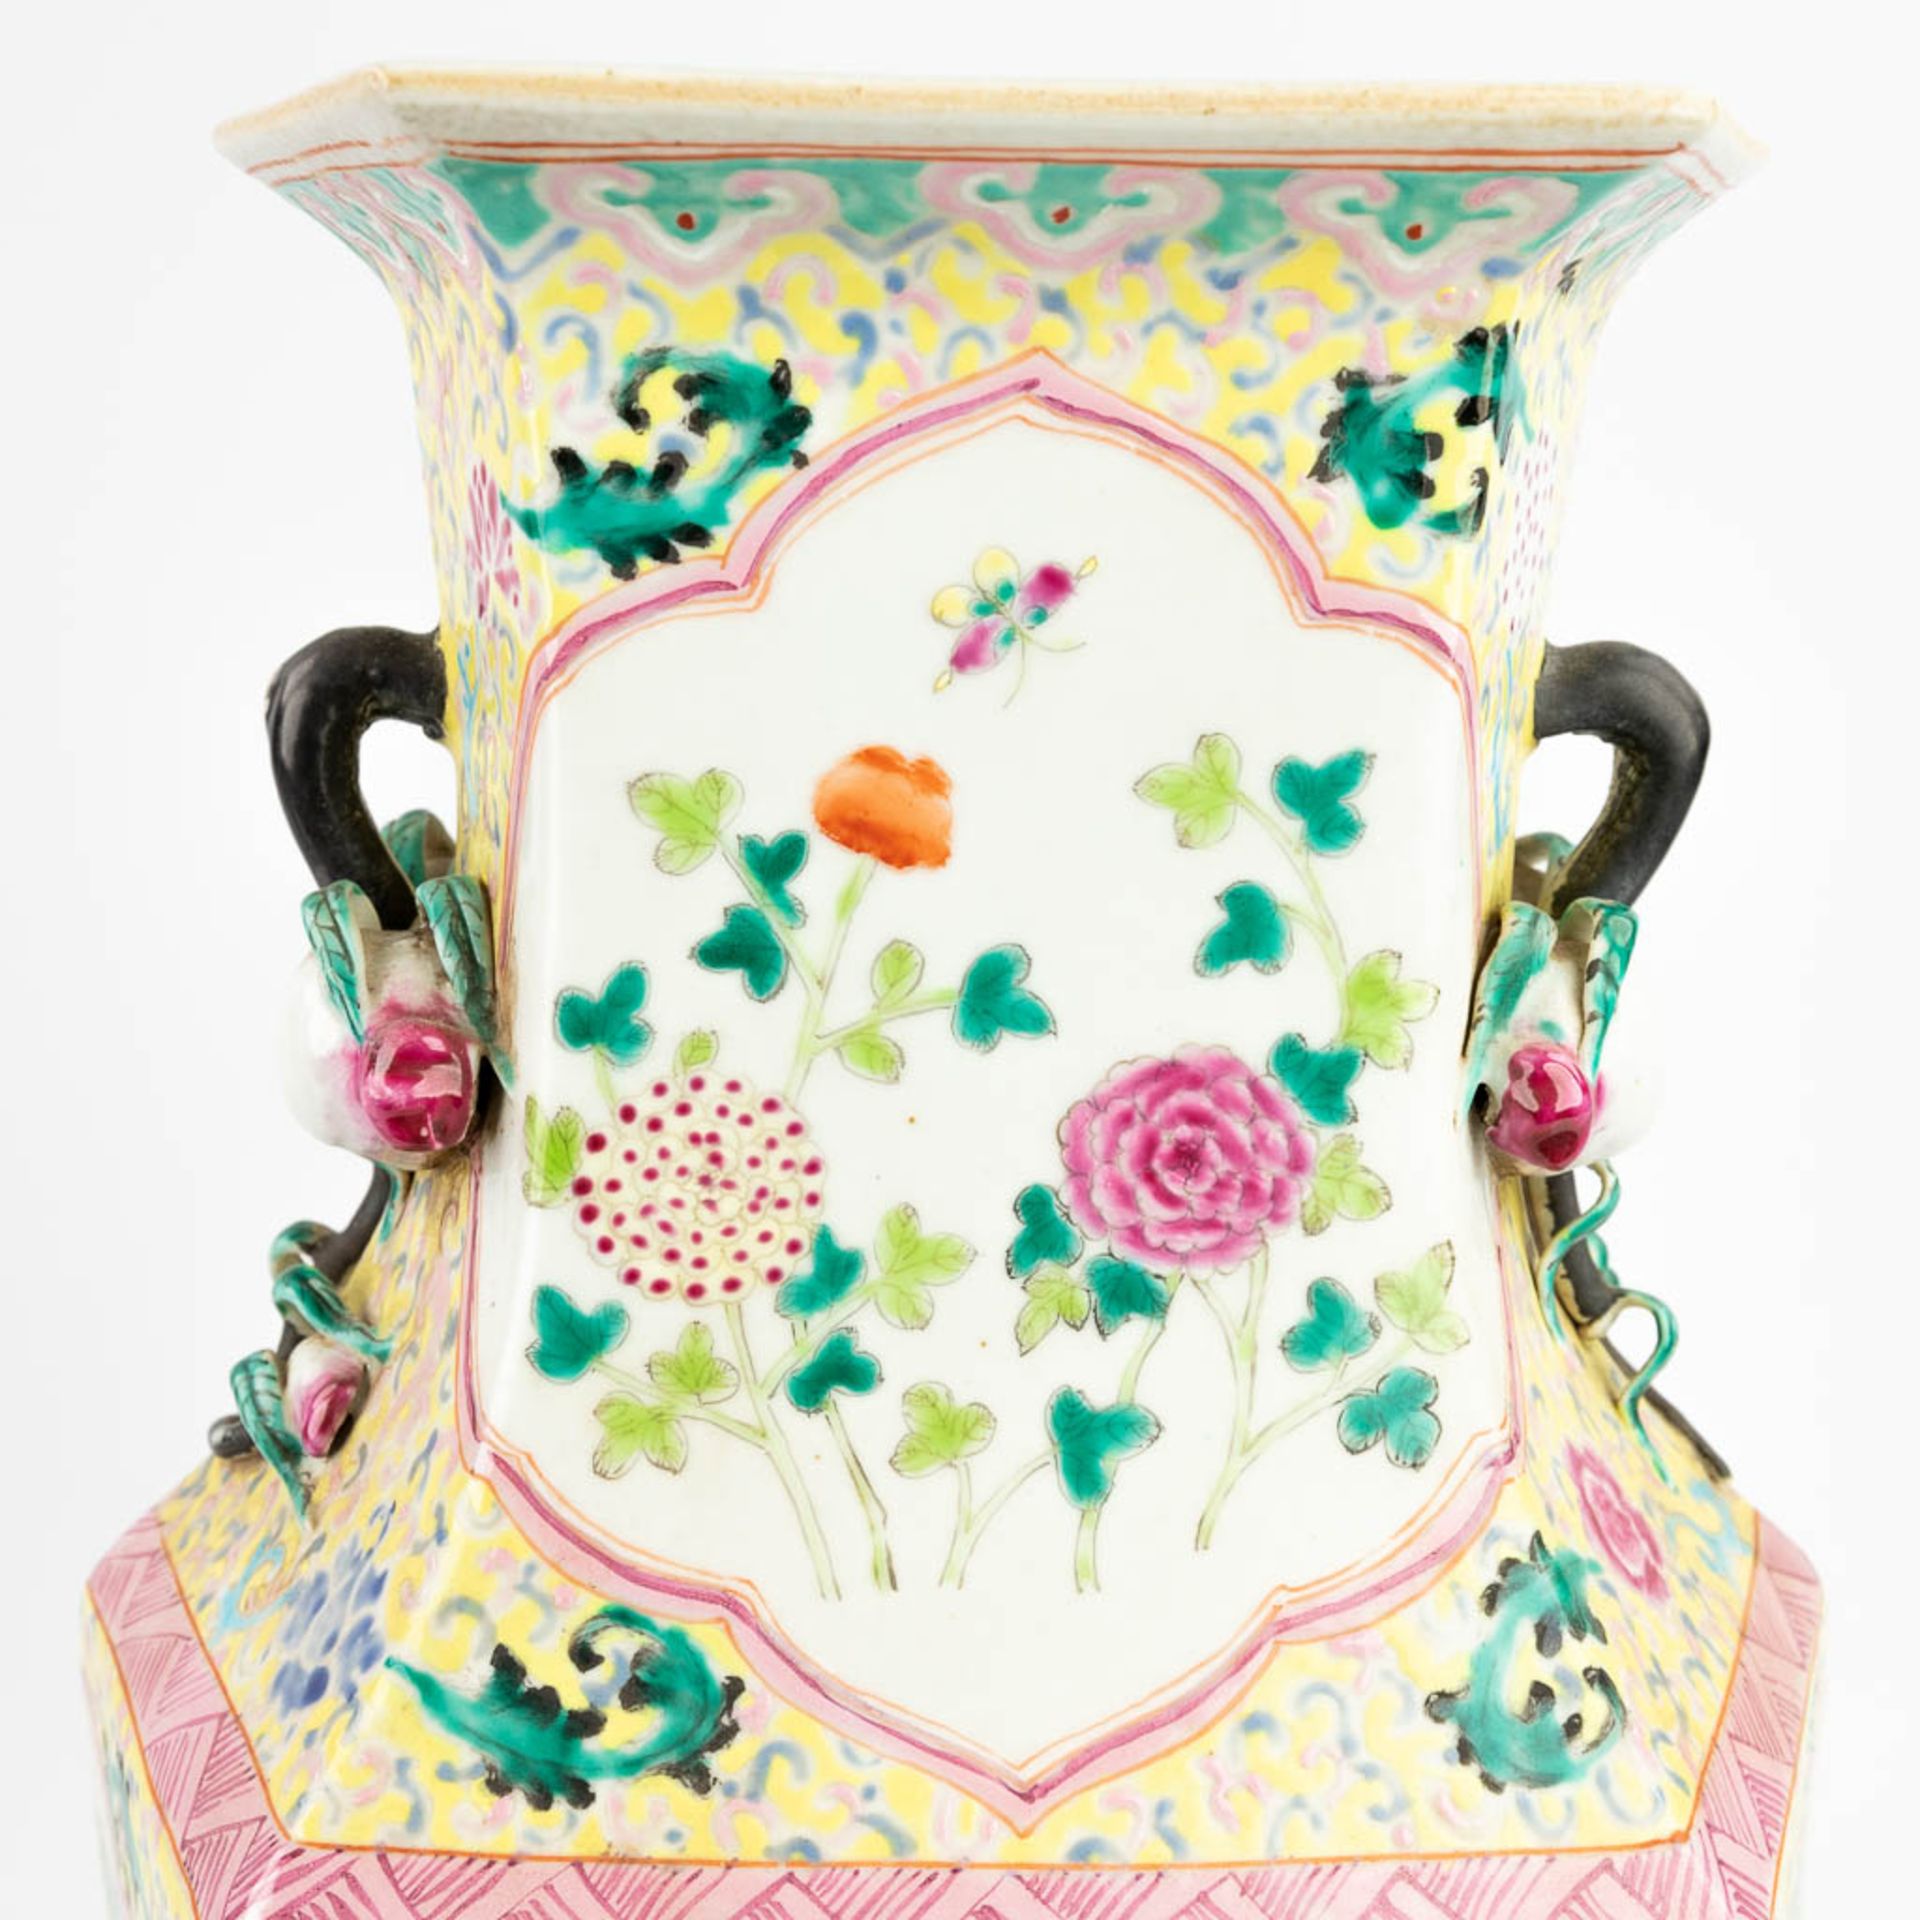 A pair of hexagonal Chinese vases made of porcelain (18 x 22 x 46 cm) - Image 14 of 17